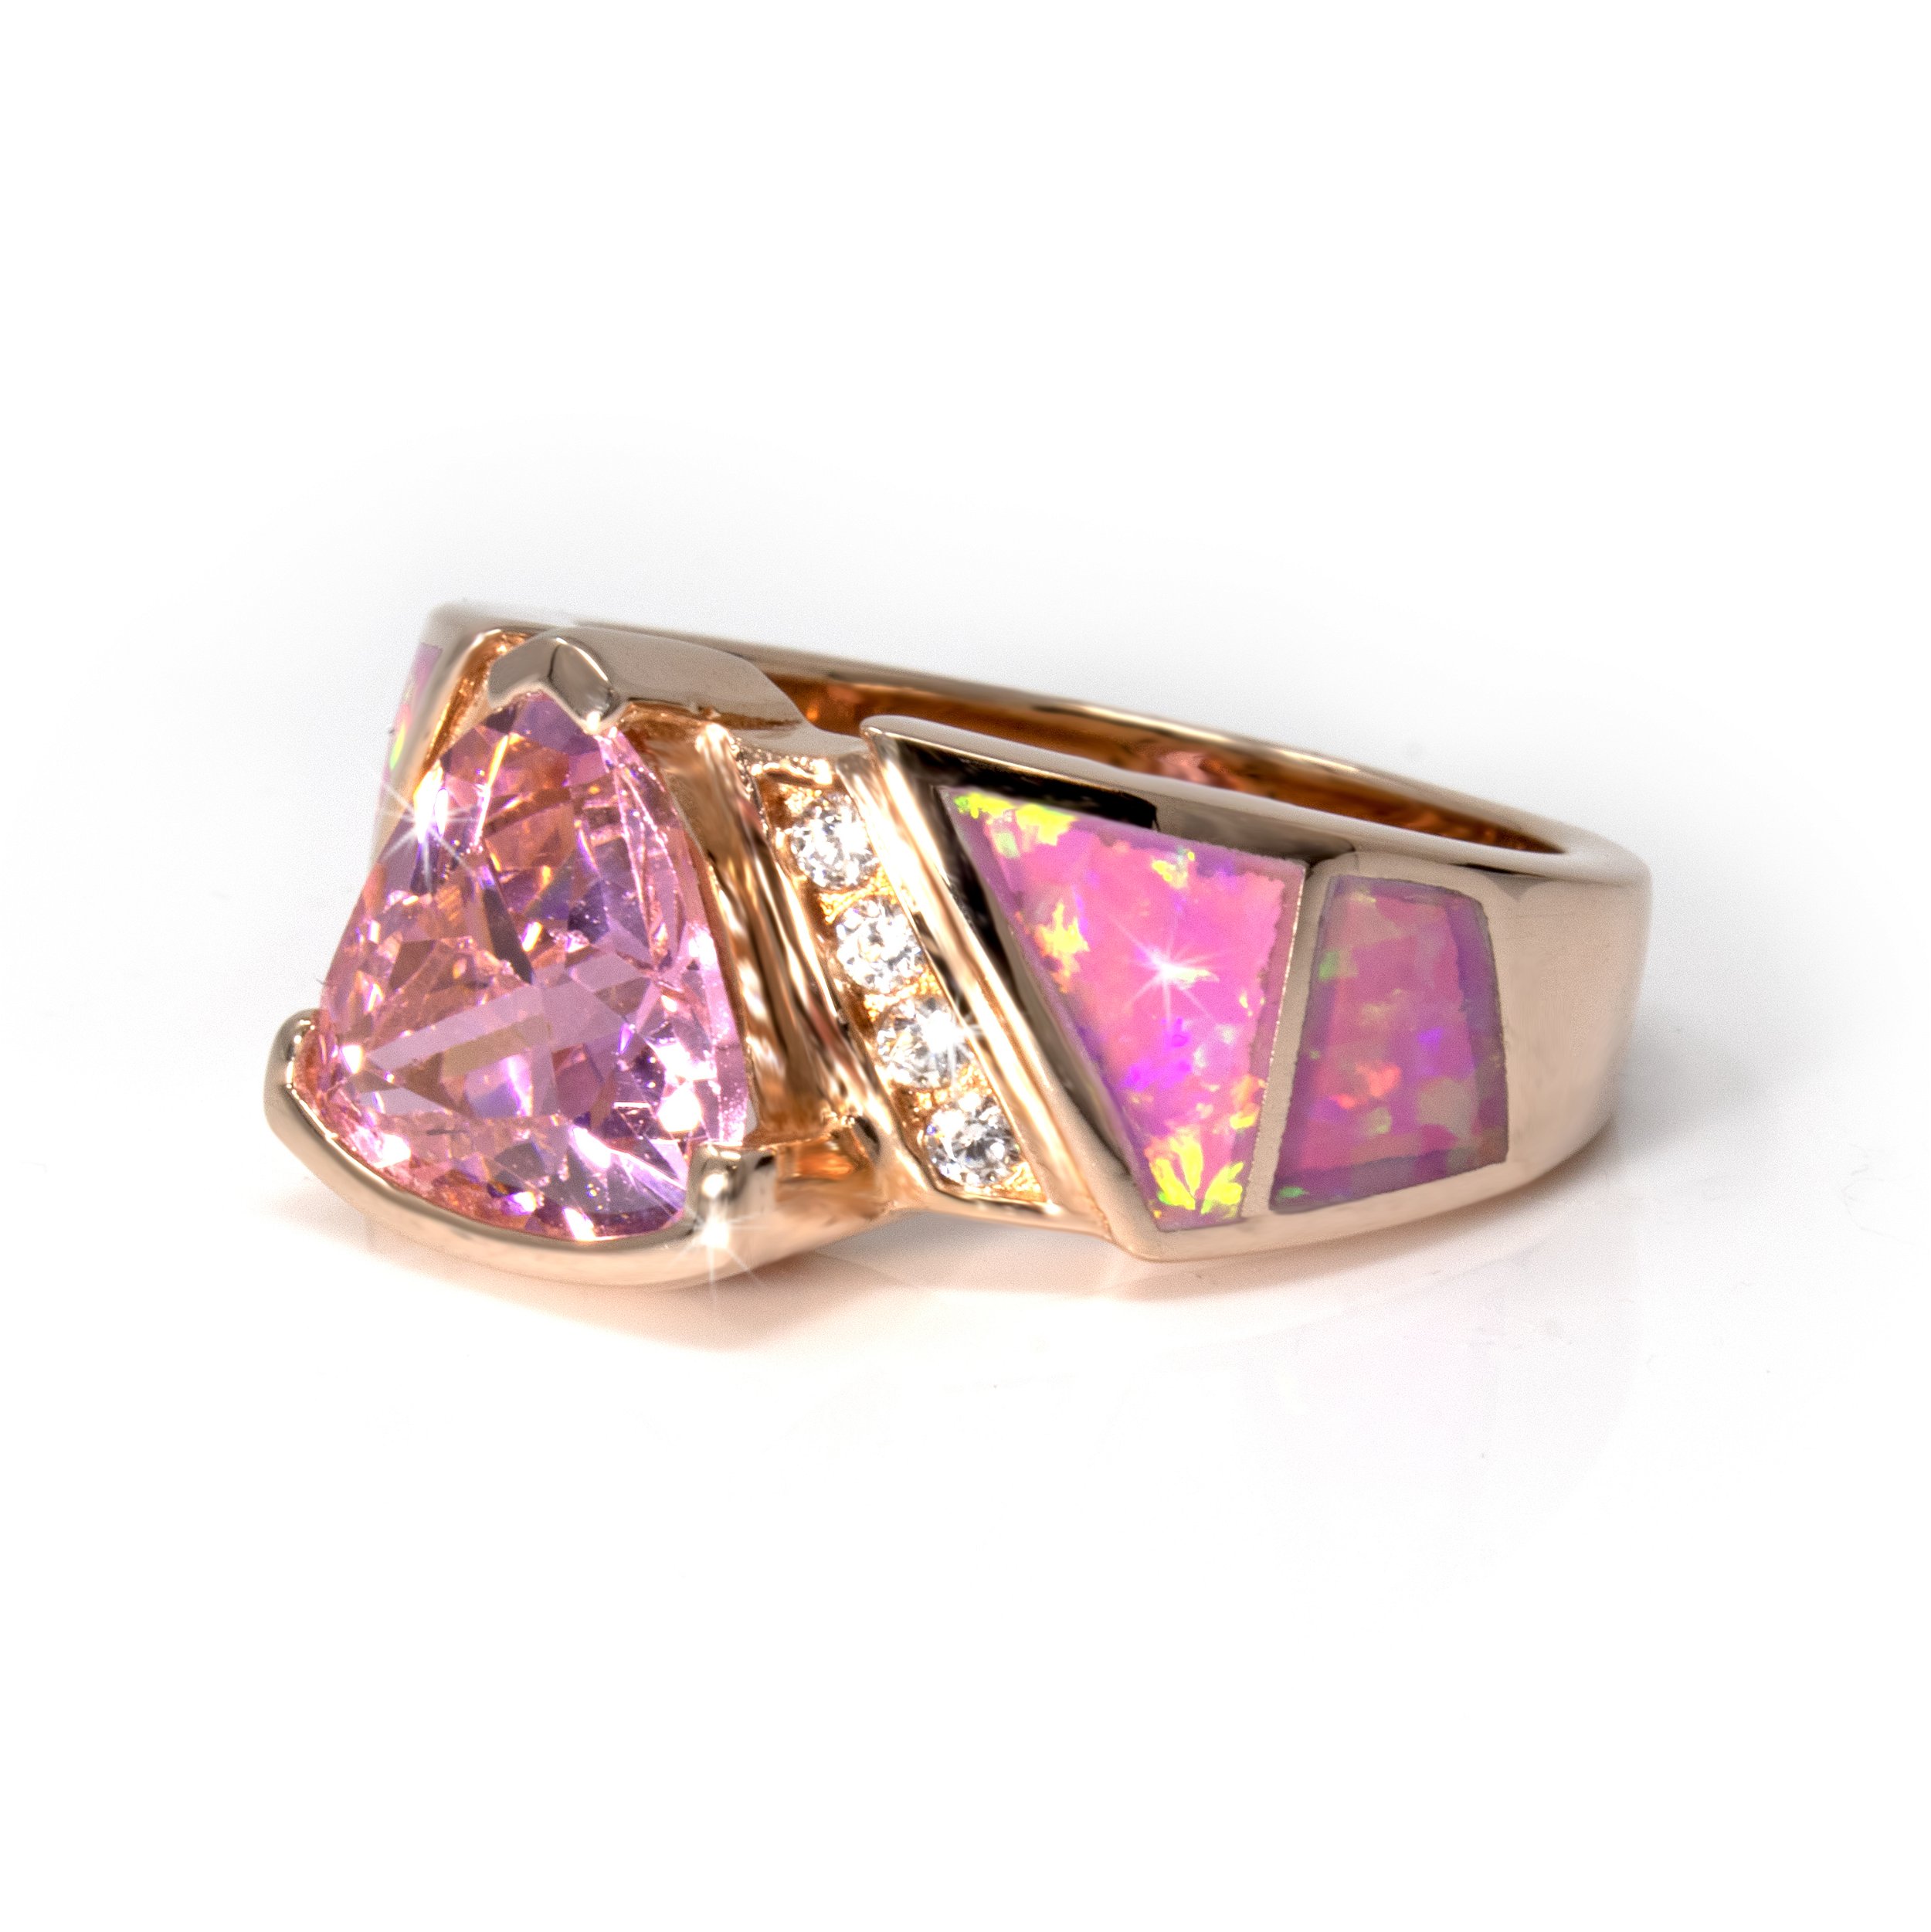 Pink Opal Ring with Rose Gold Overlay Size 8 - Inlaid Top Band With Pink Cz Trillion Set In Raised Sterling Silver Half Bezel & 2 White Cz Trios On Side